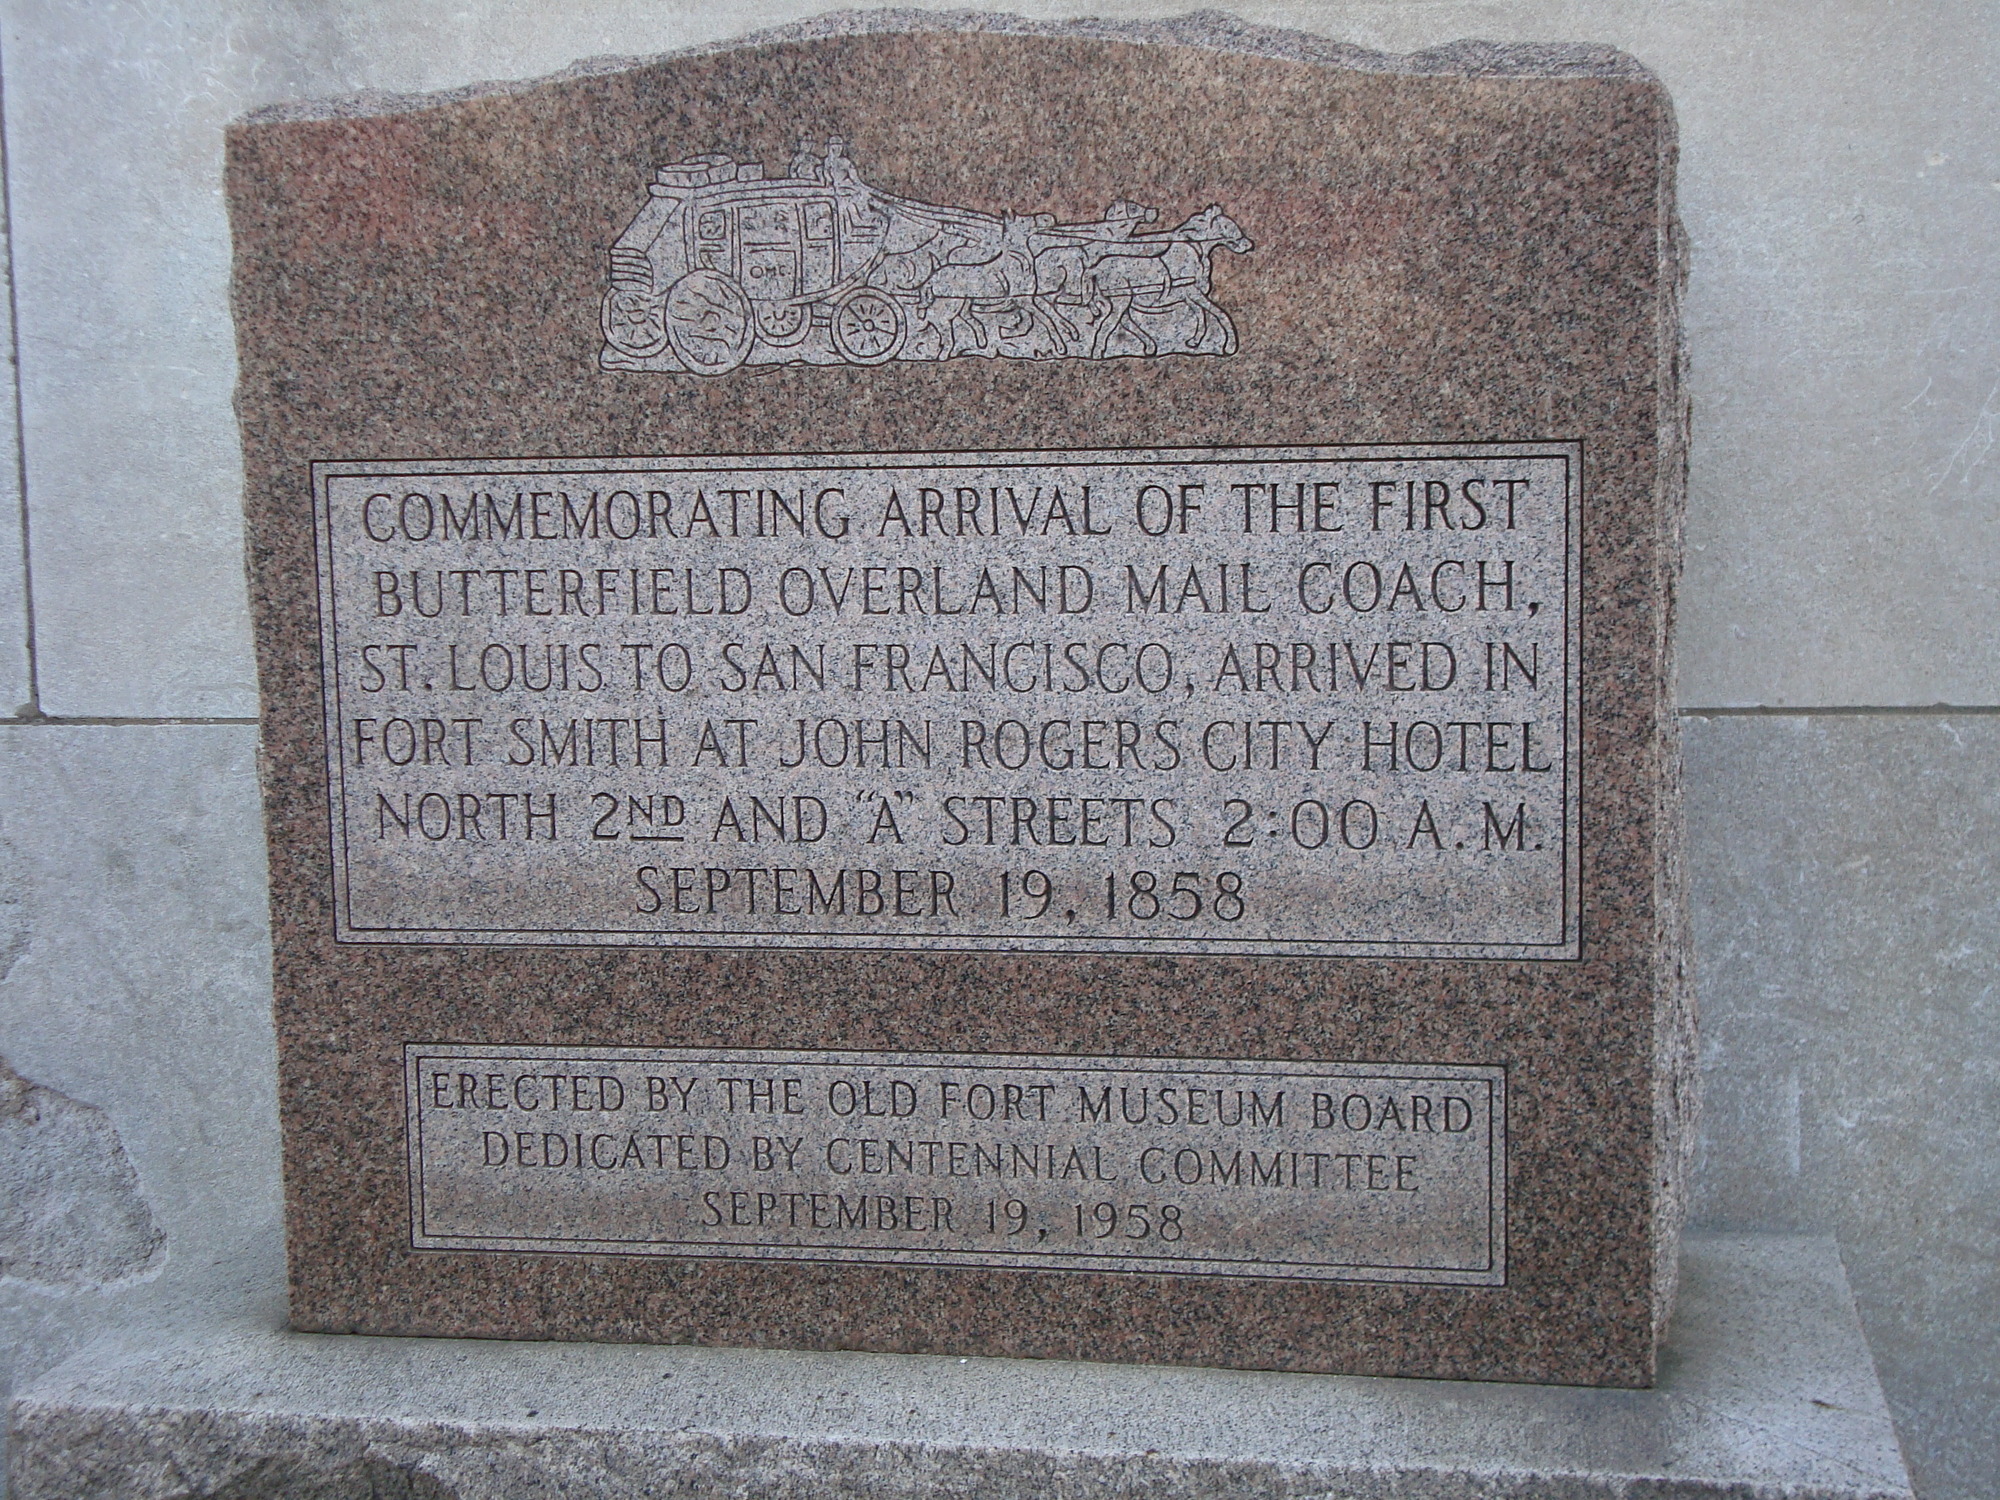 A commemorative monument at the Fort Smith Museum of History in Fort Smith, Arkansas